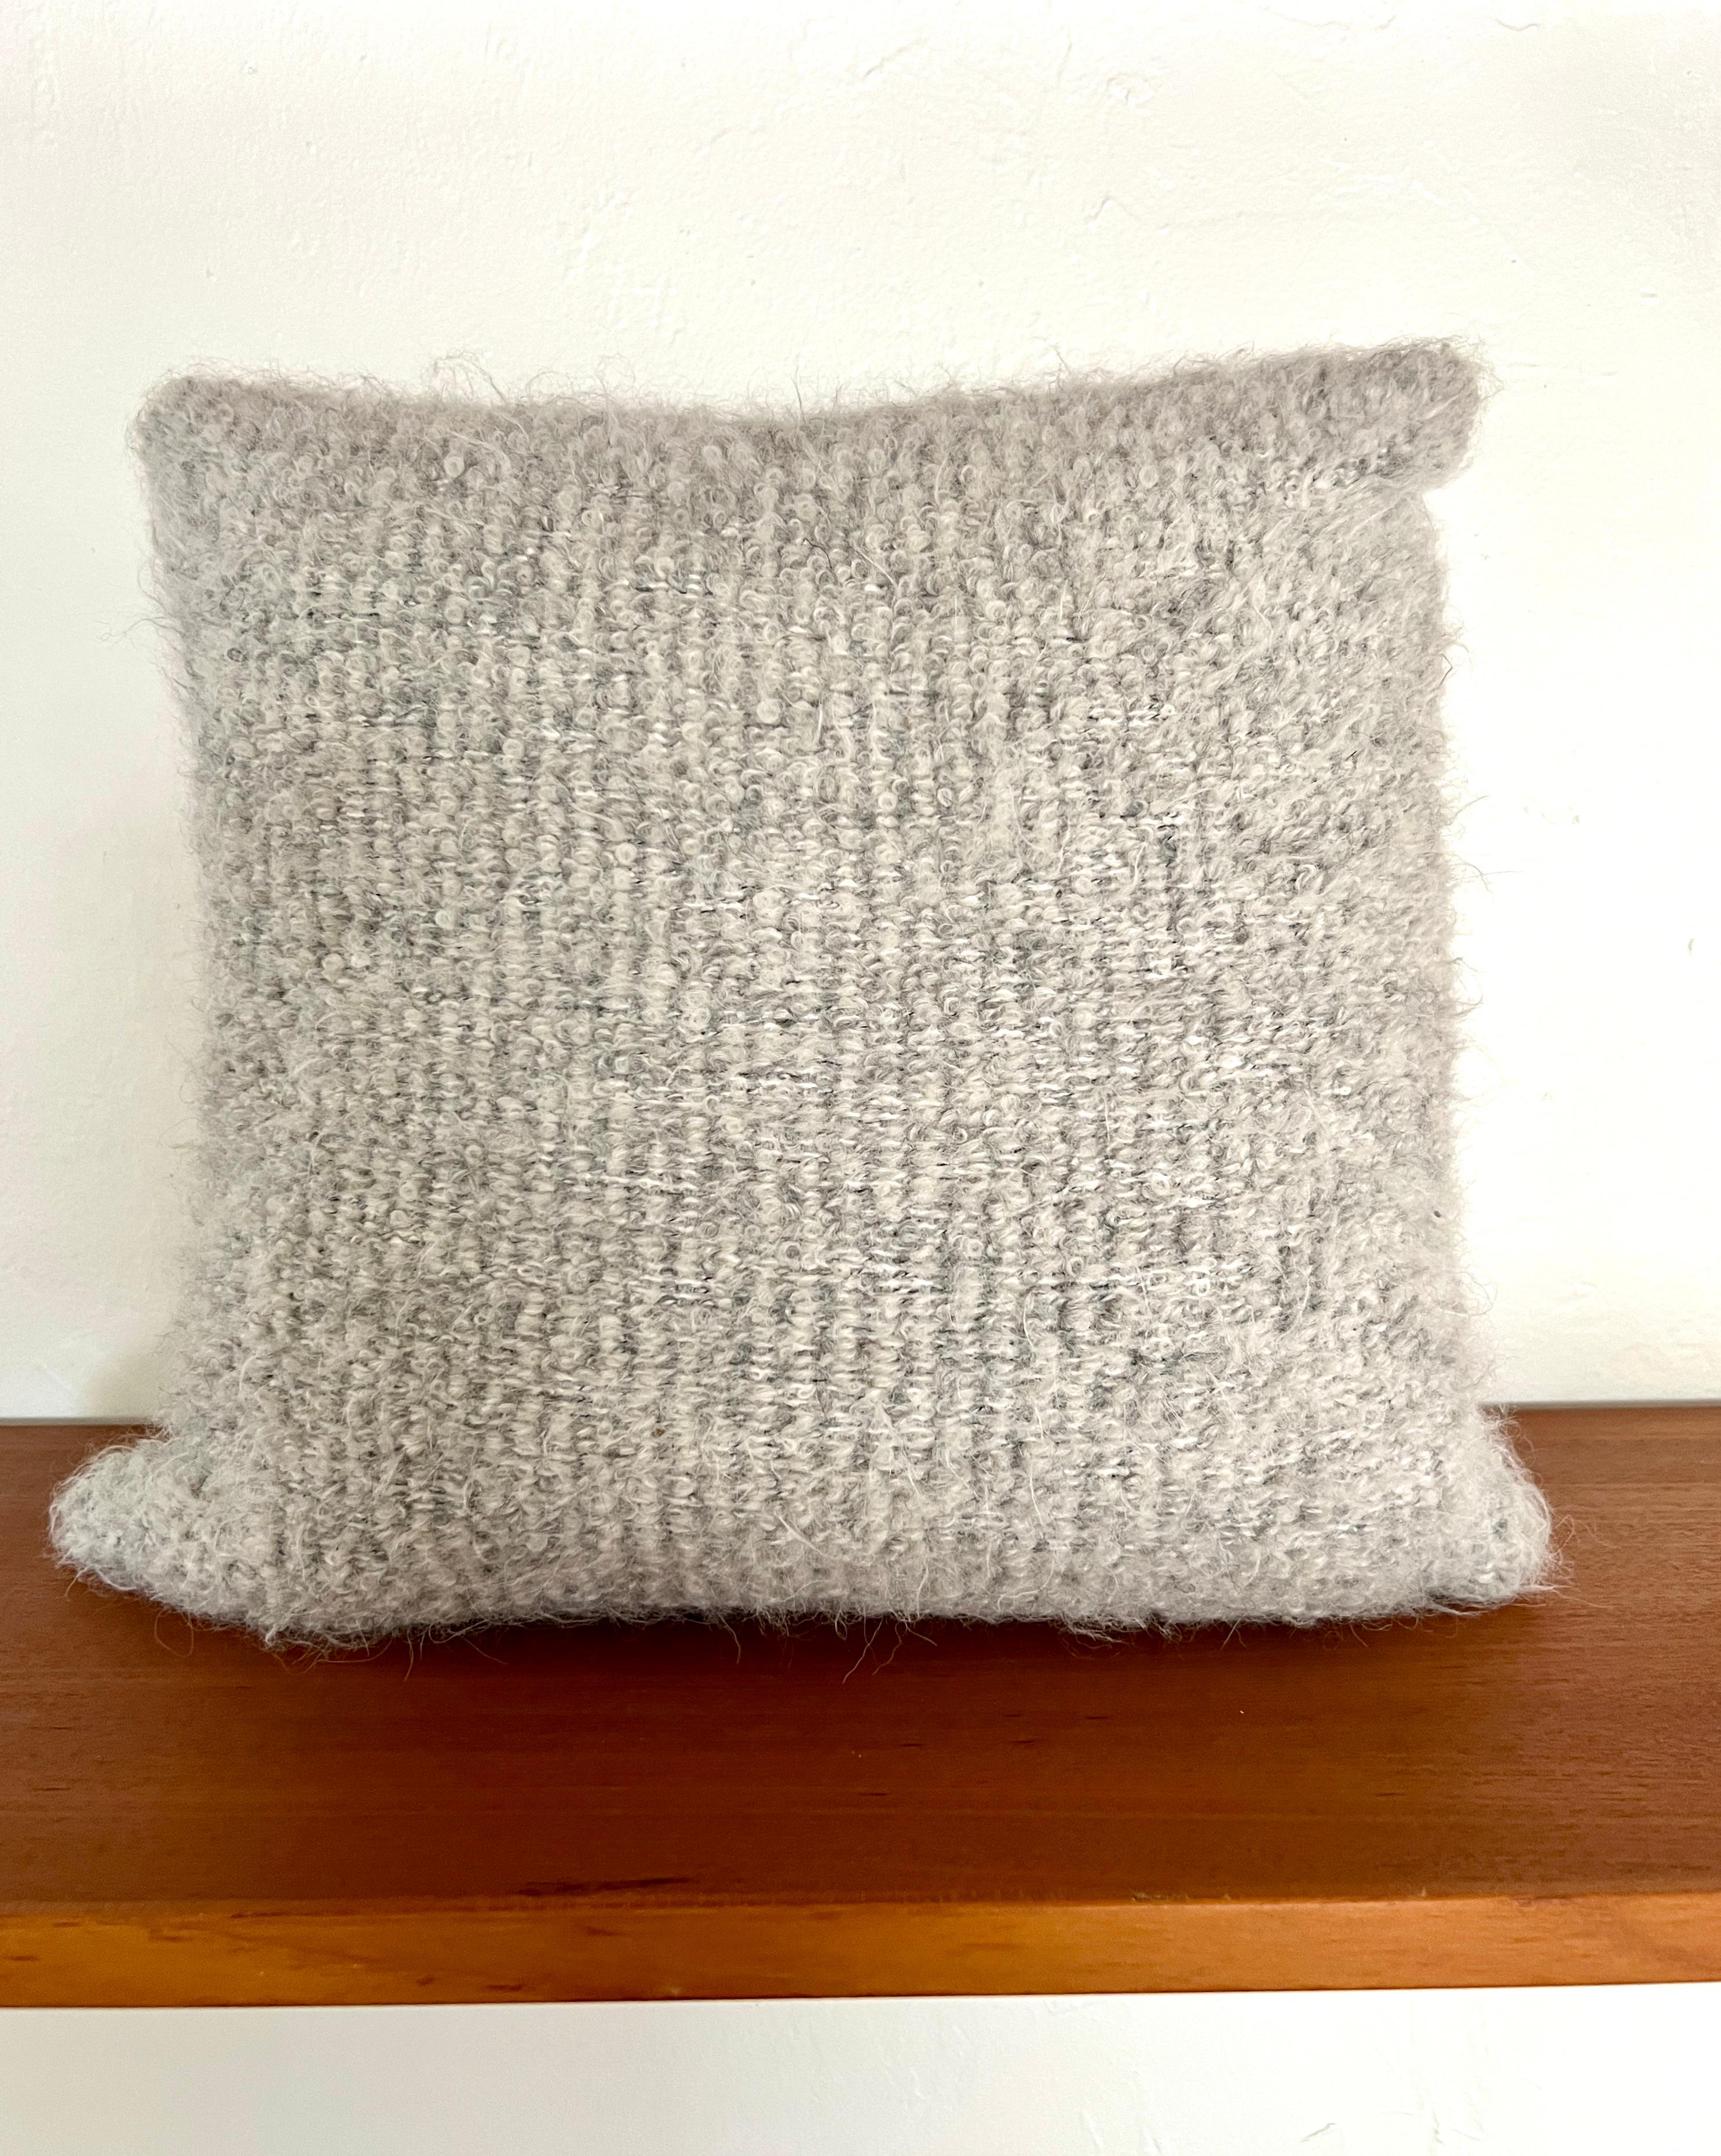 Luxury decorative pillow made with Pierre Frey’s Scarlette Plume fabric, featuring a blend of alpaca, mohair, and merino wools to create this stunning woven texture. The reverse side of the pillow is equally as beautiful and features full grain